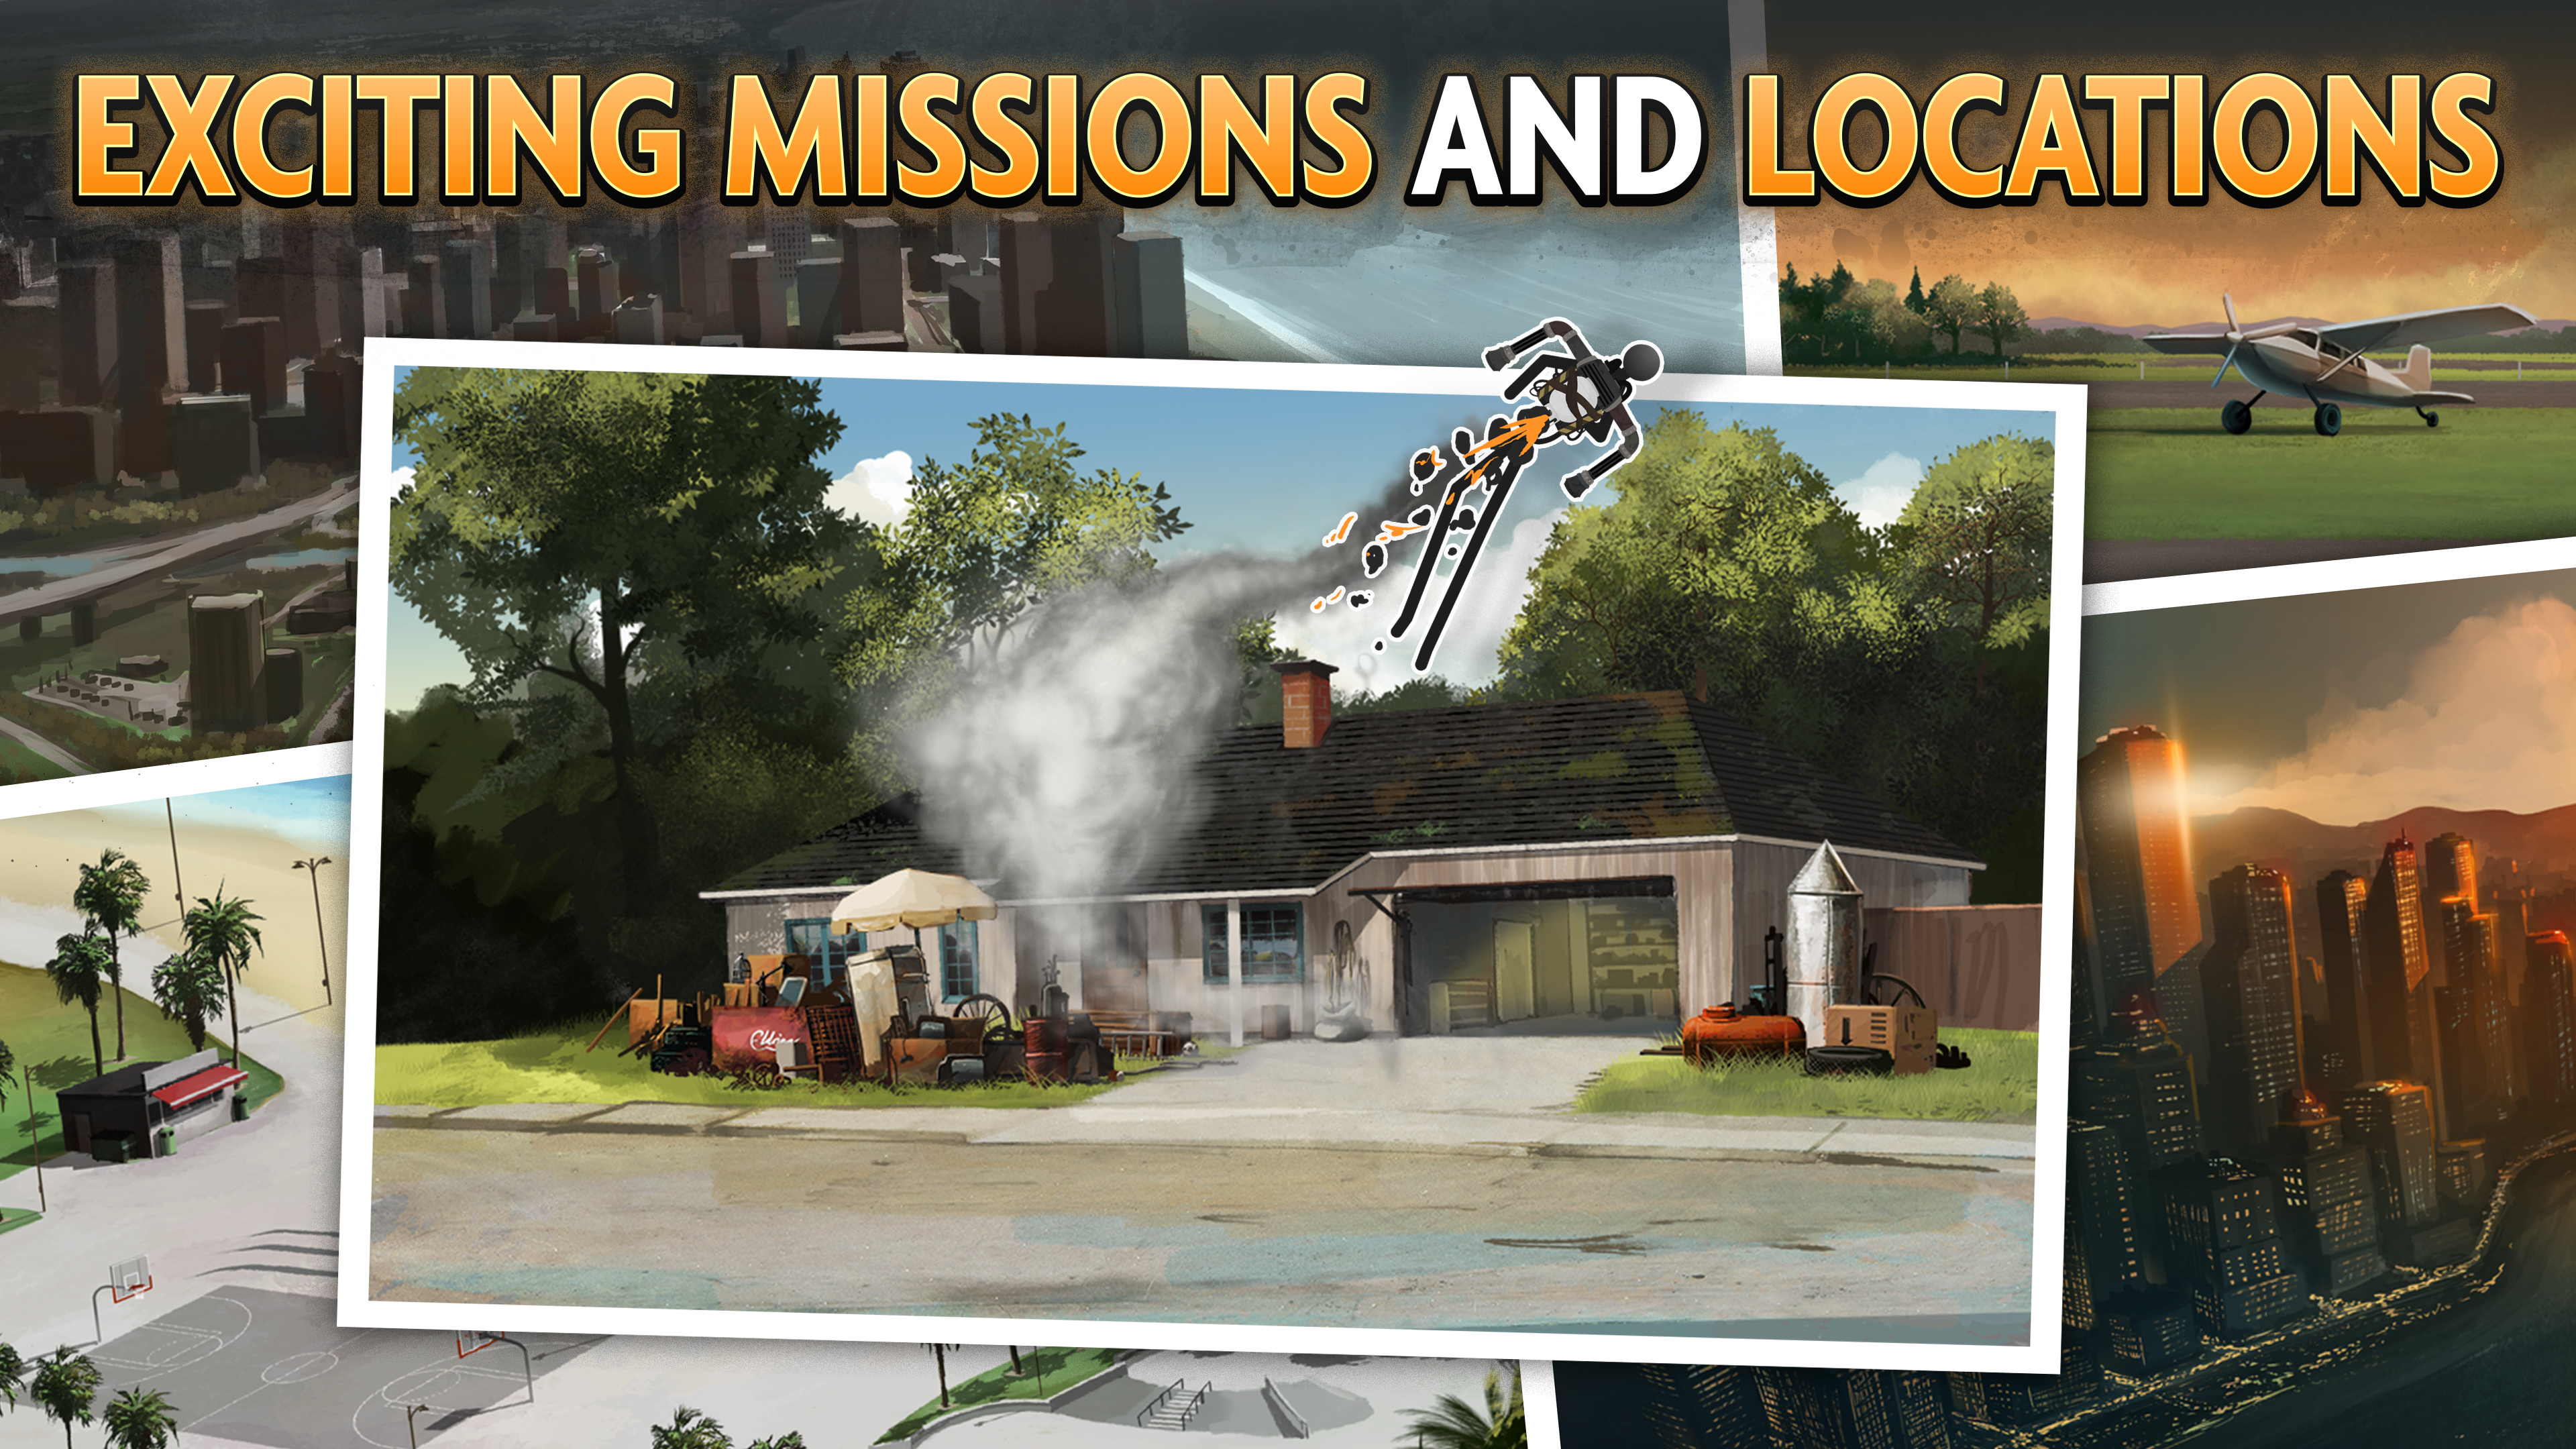 Exciting Mission and Locations